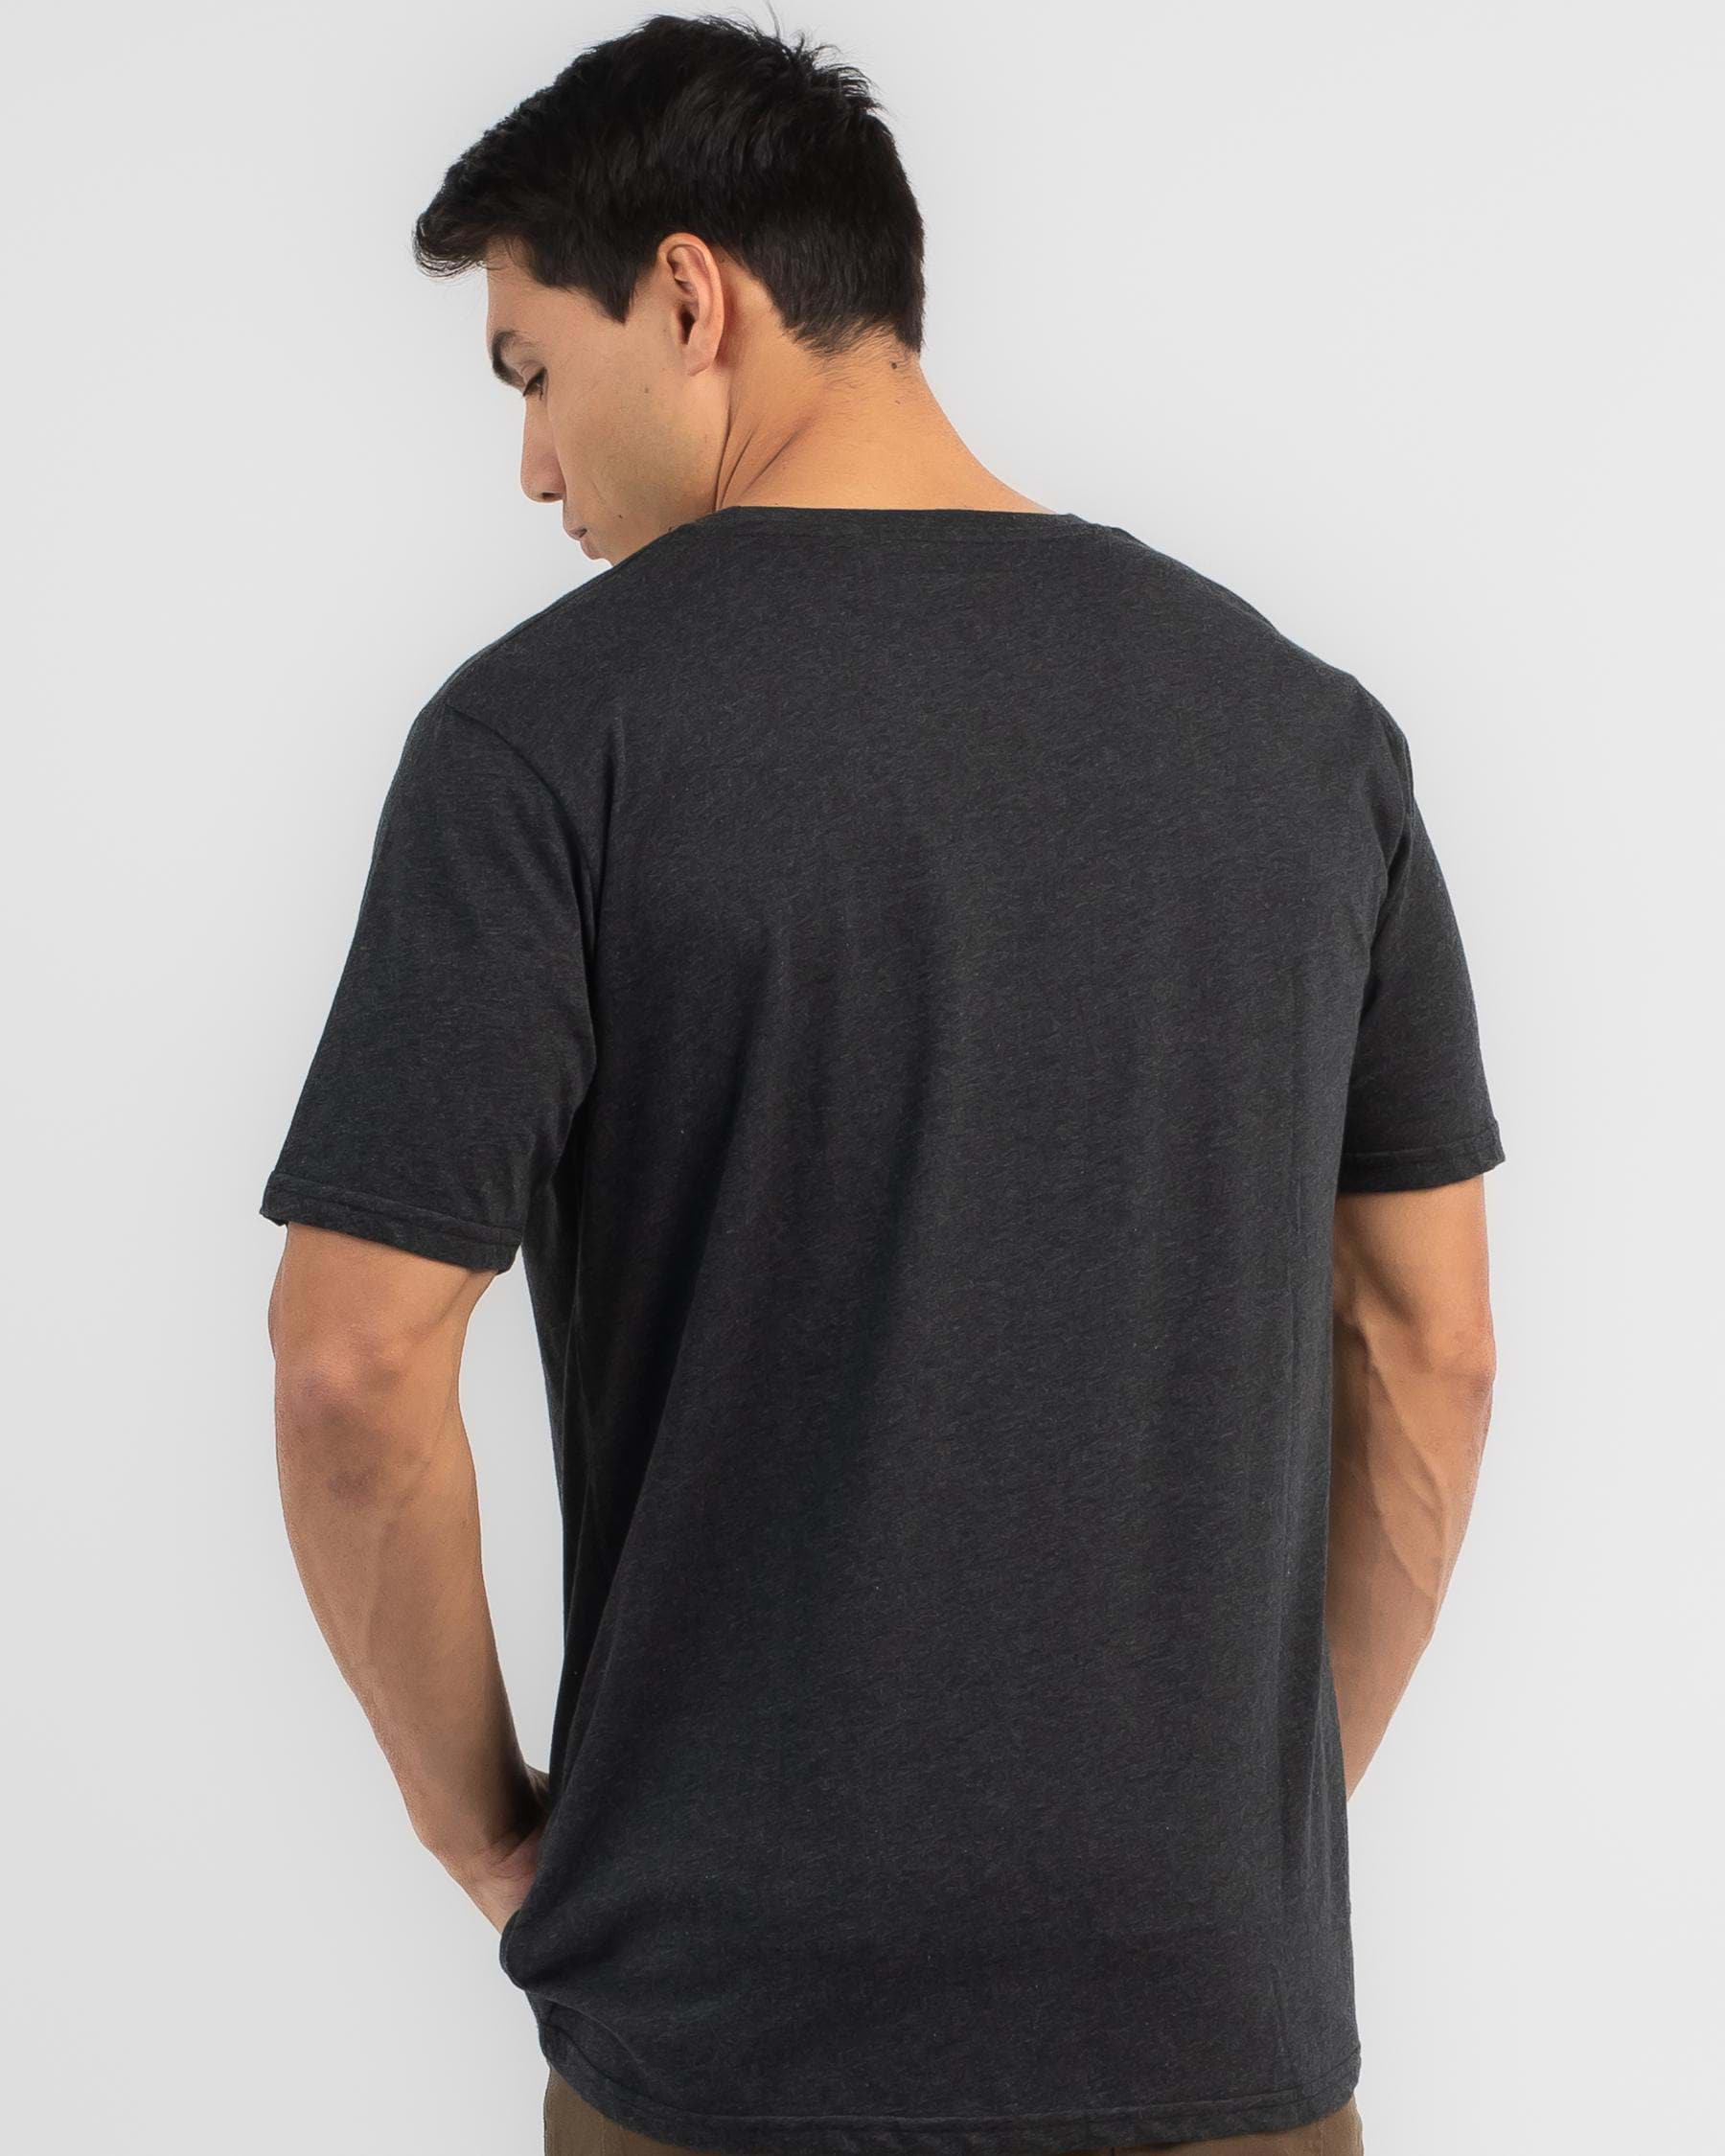 Lucid Essential 2.0 T-Shirt In Char Marle - Fast Shipping & Easy ...